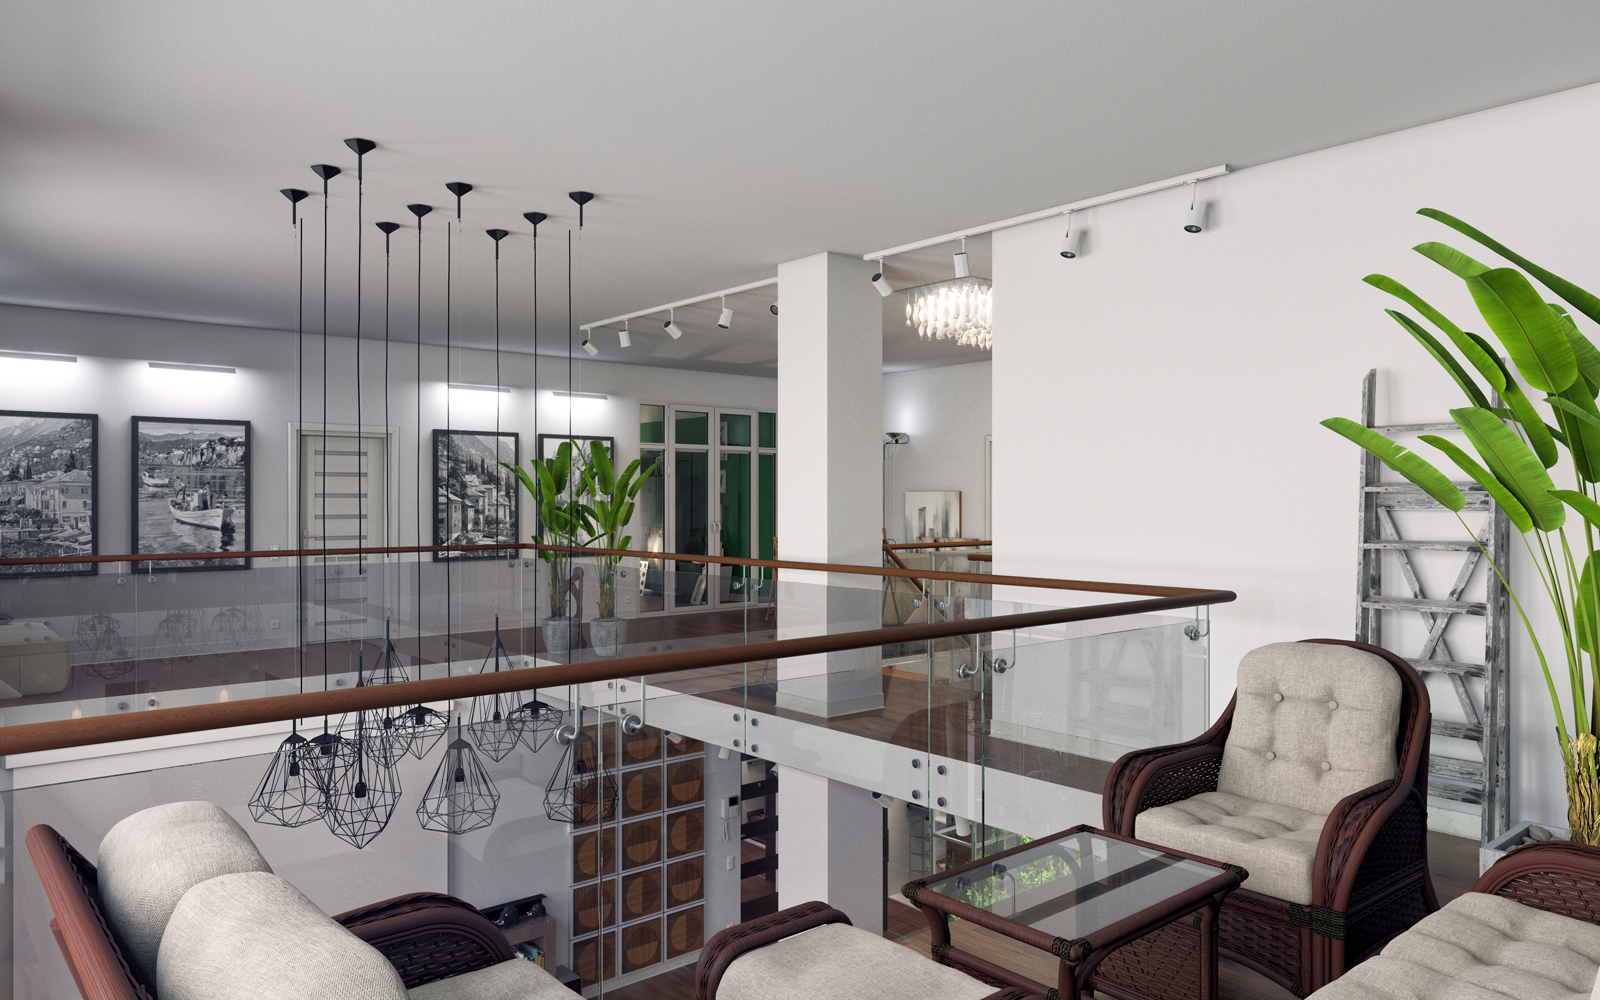 Complesso residenziale "Nobel". Penthouse. in 3d max corona render immagine